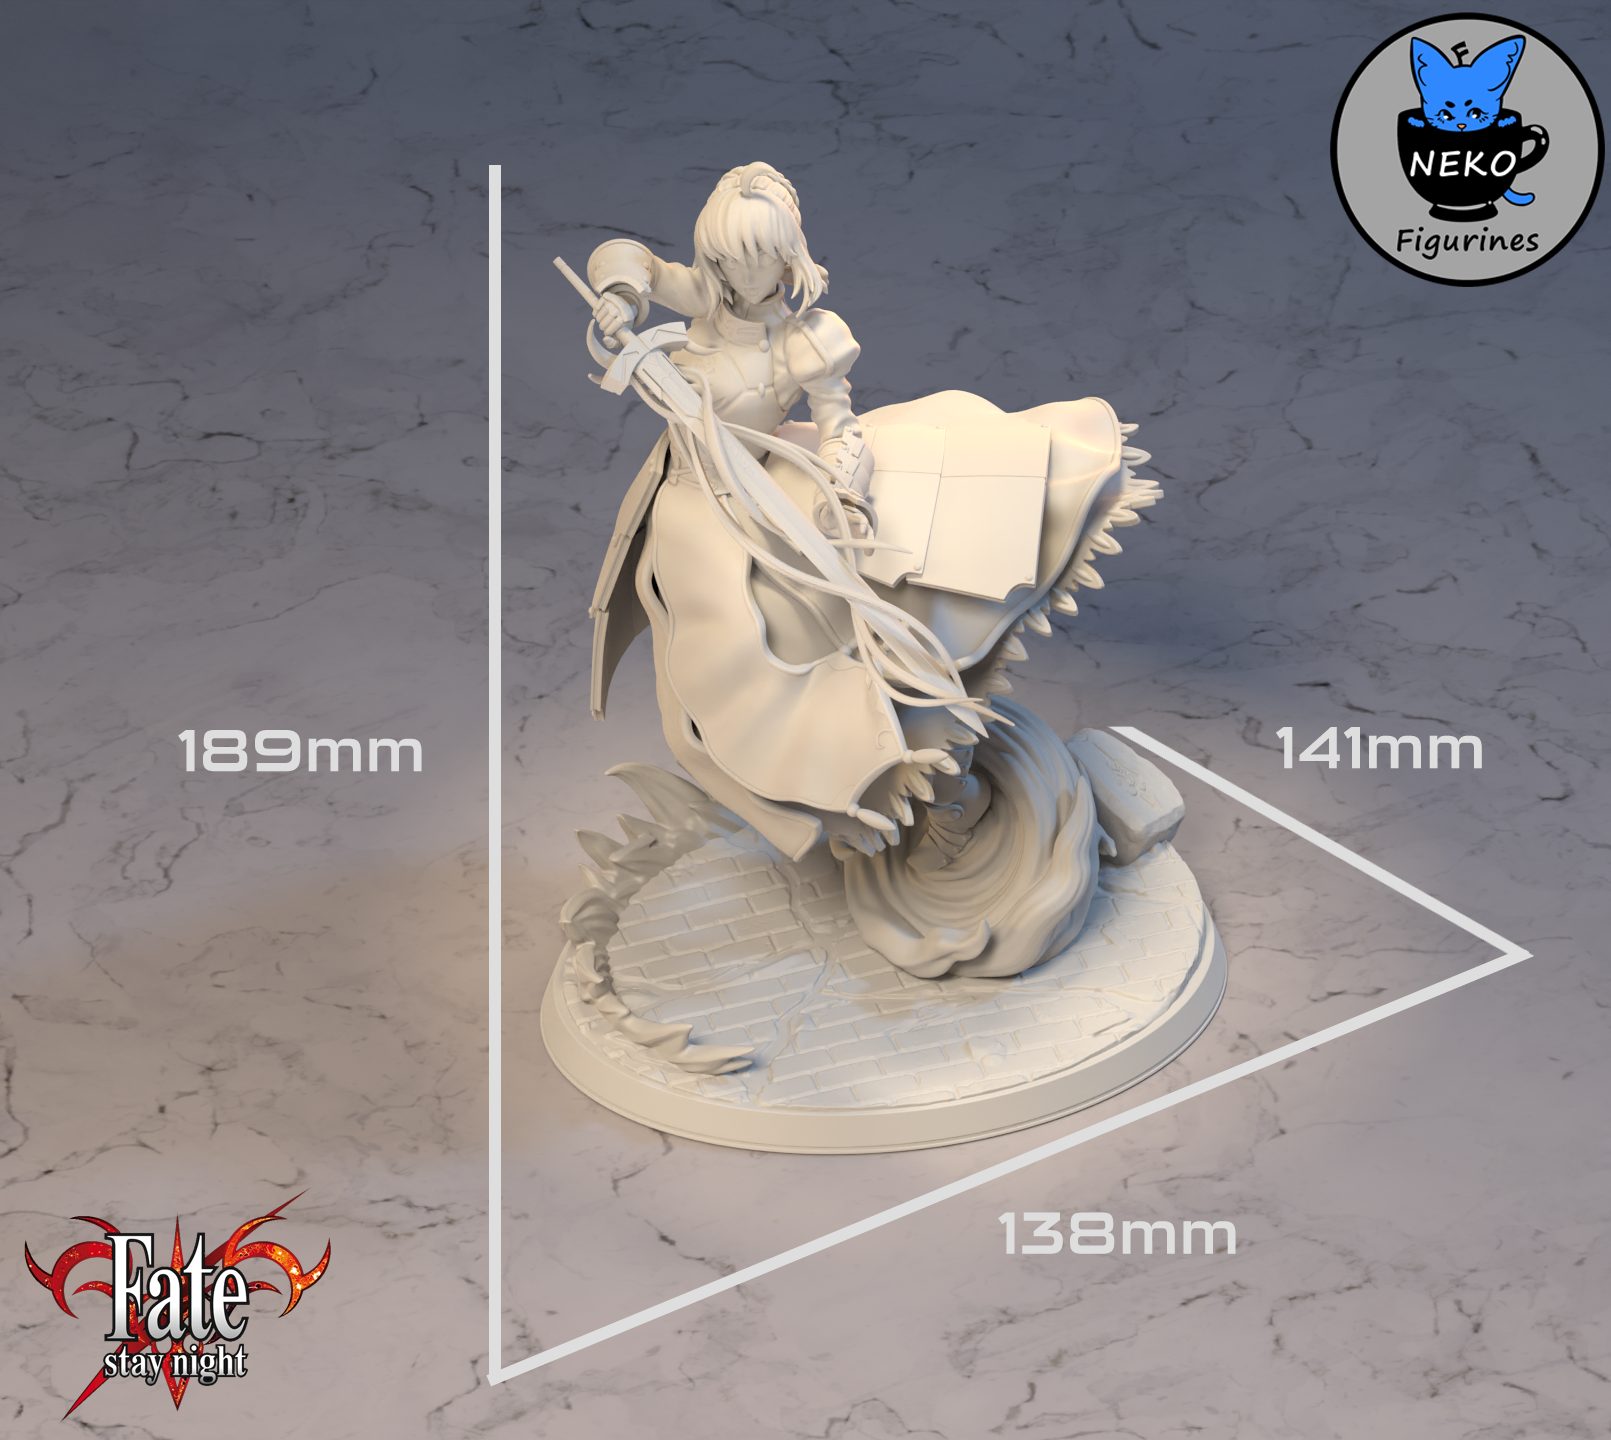 Saber - Fate Stay Night Anime Figurine for 3D Printing, 3D models download